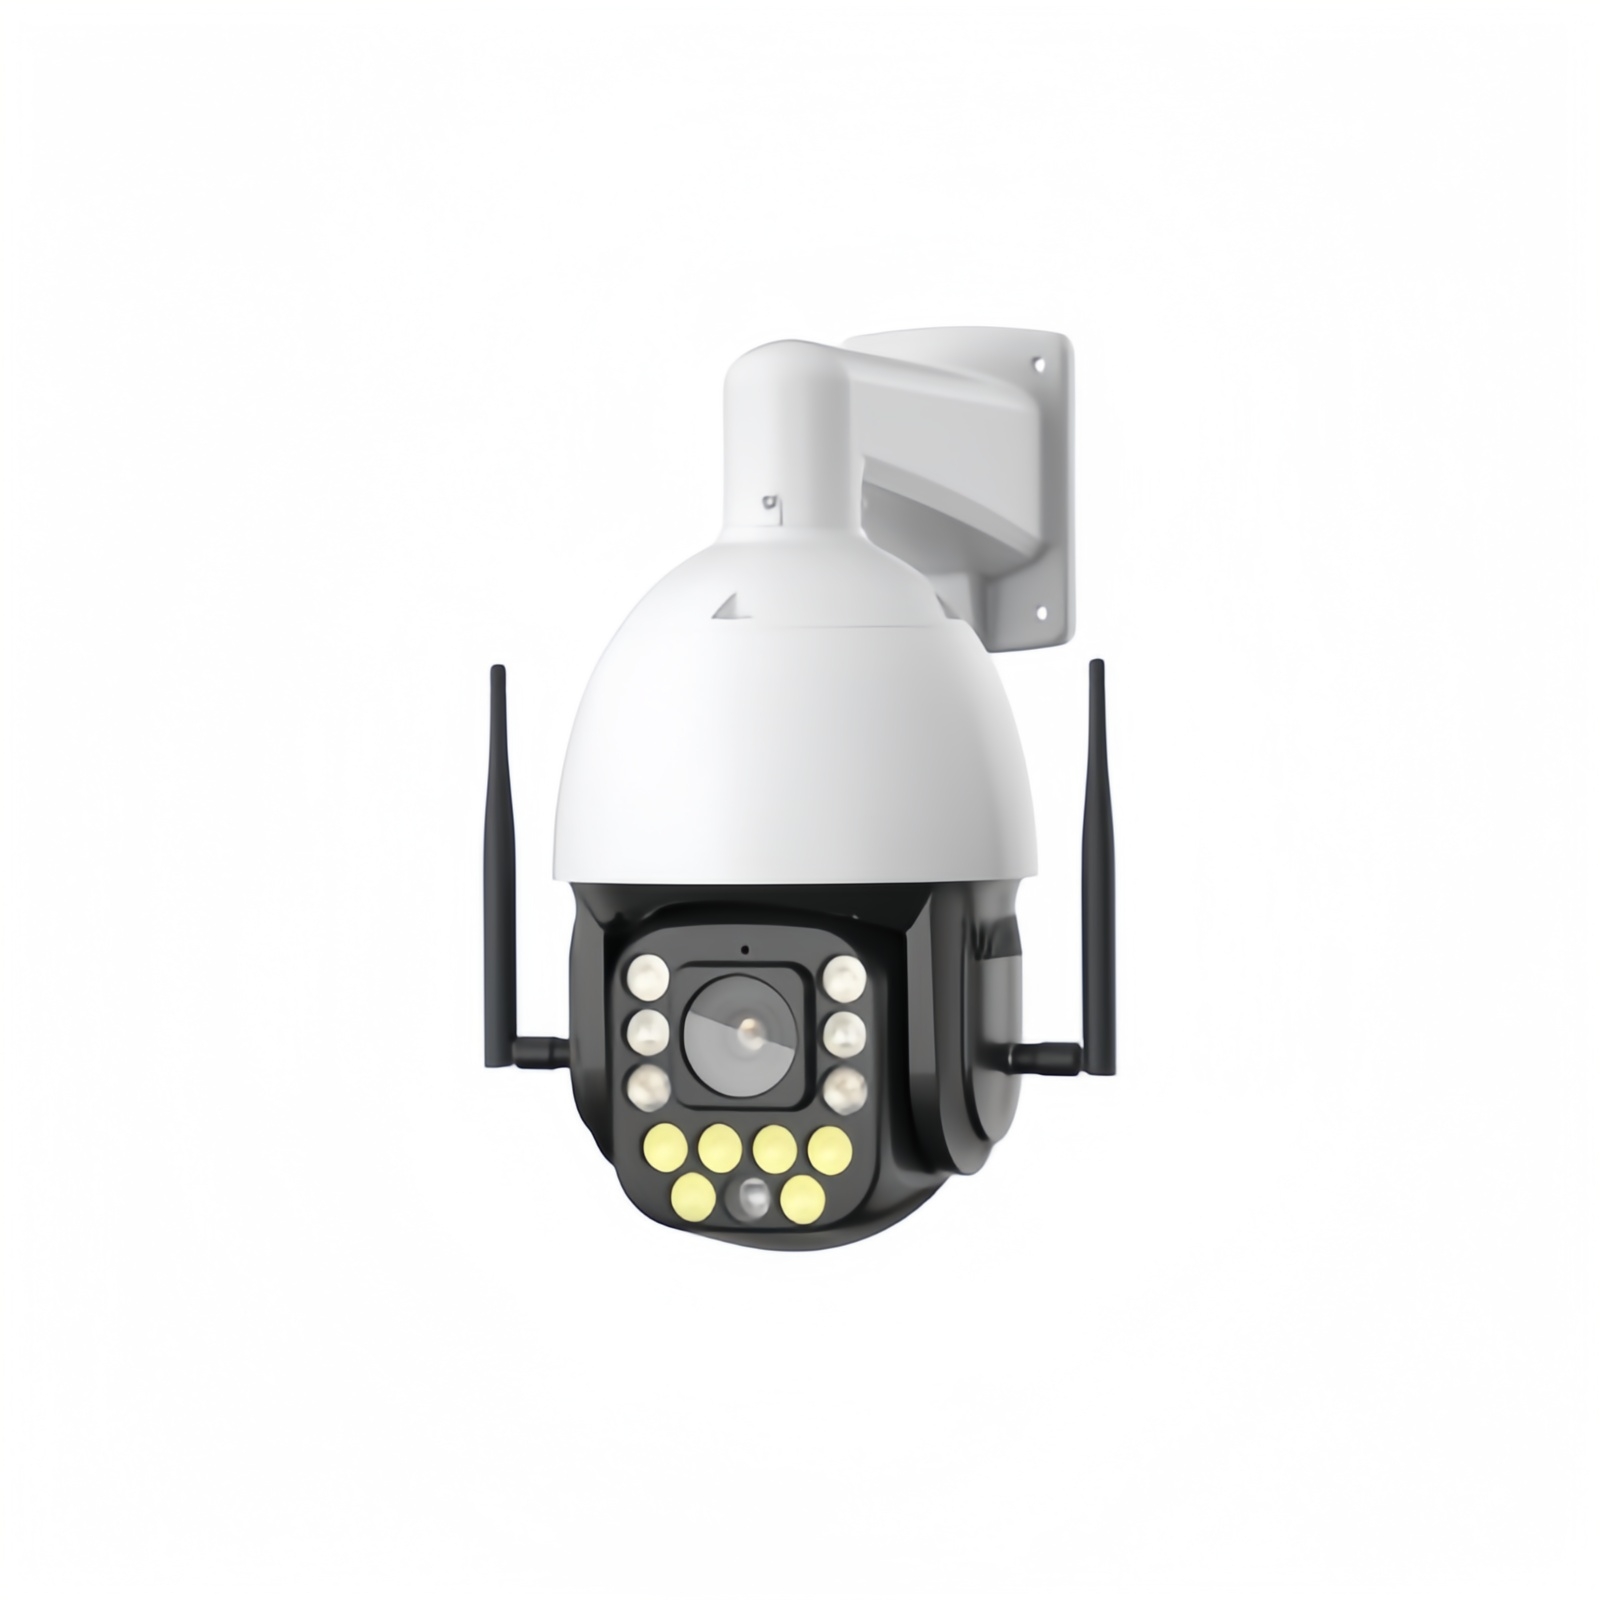 4K high quality cctv camera with long distance PK-15